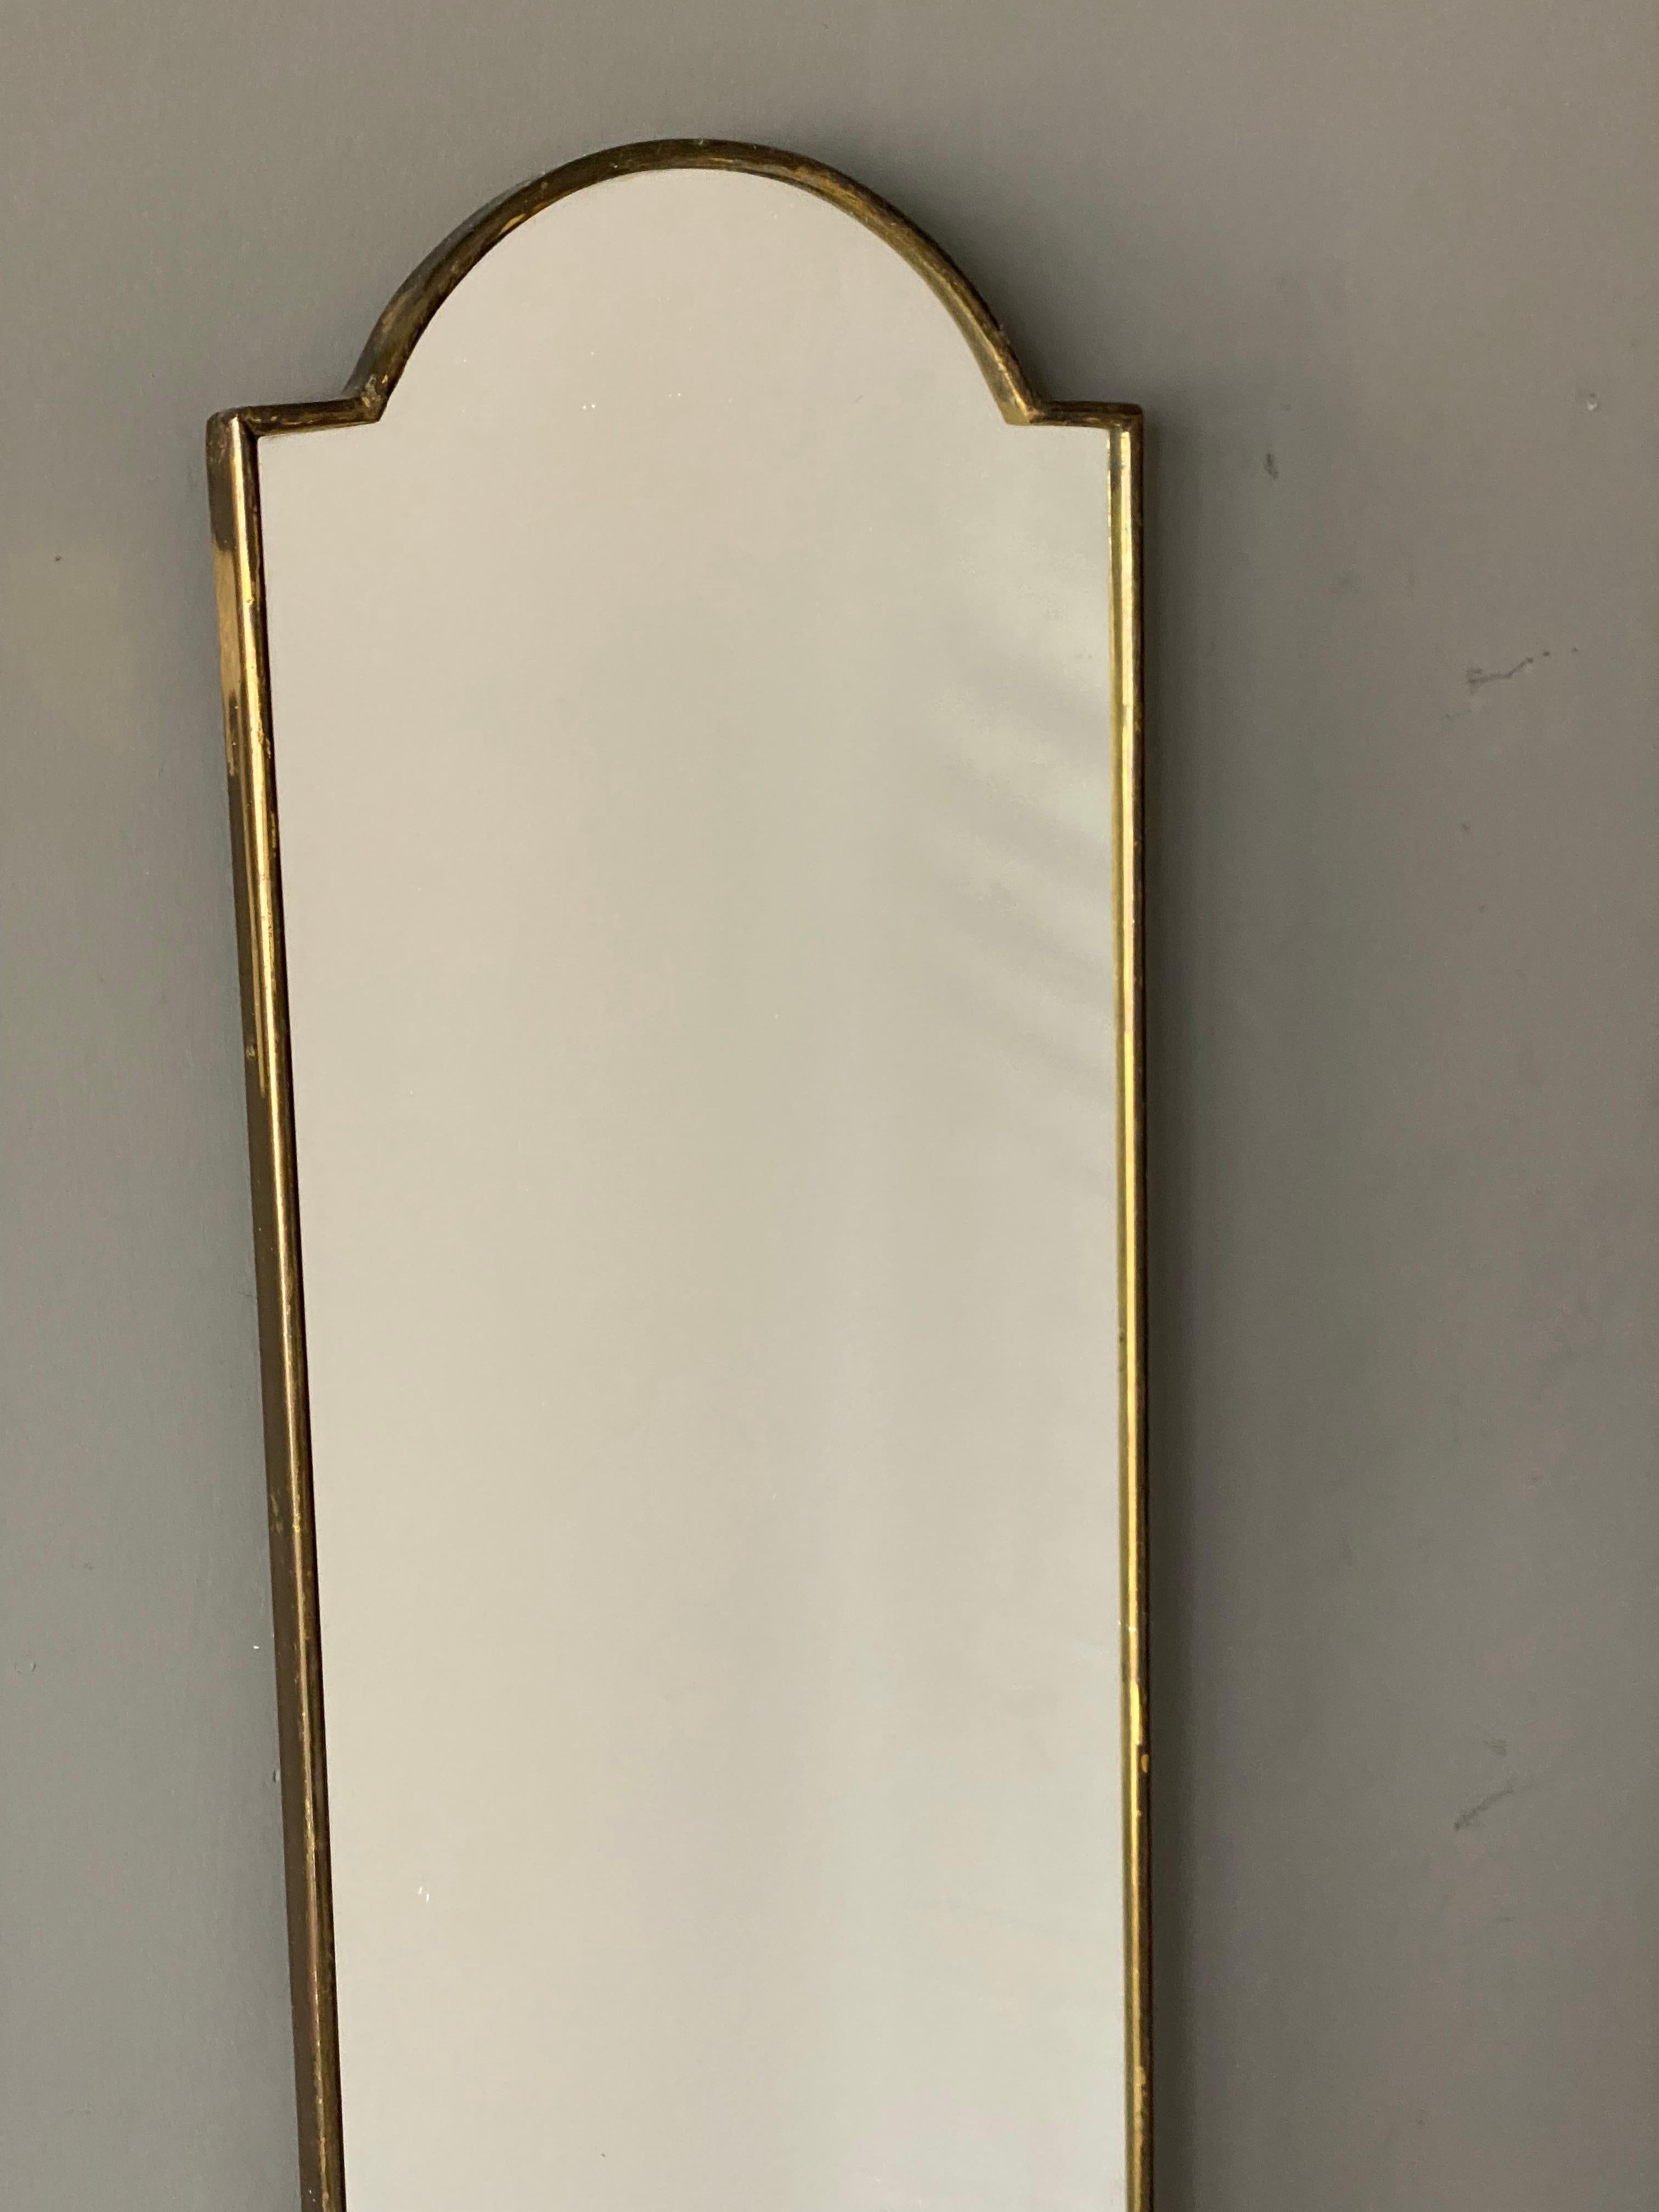 A pair of large wall mirrors, produced in Italy, 1940s-1950s. Cut mirror glass is framed in brass. 

Other designers of the period include Gio Ponti, Fontana Arte, Max Ingrand, Franco Albini, and Josef Frank.